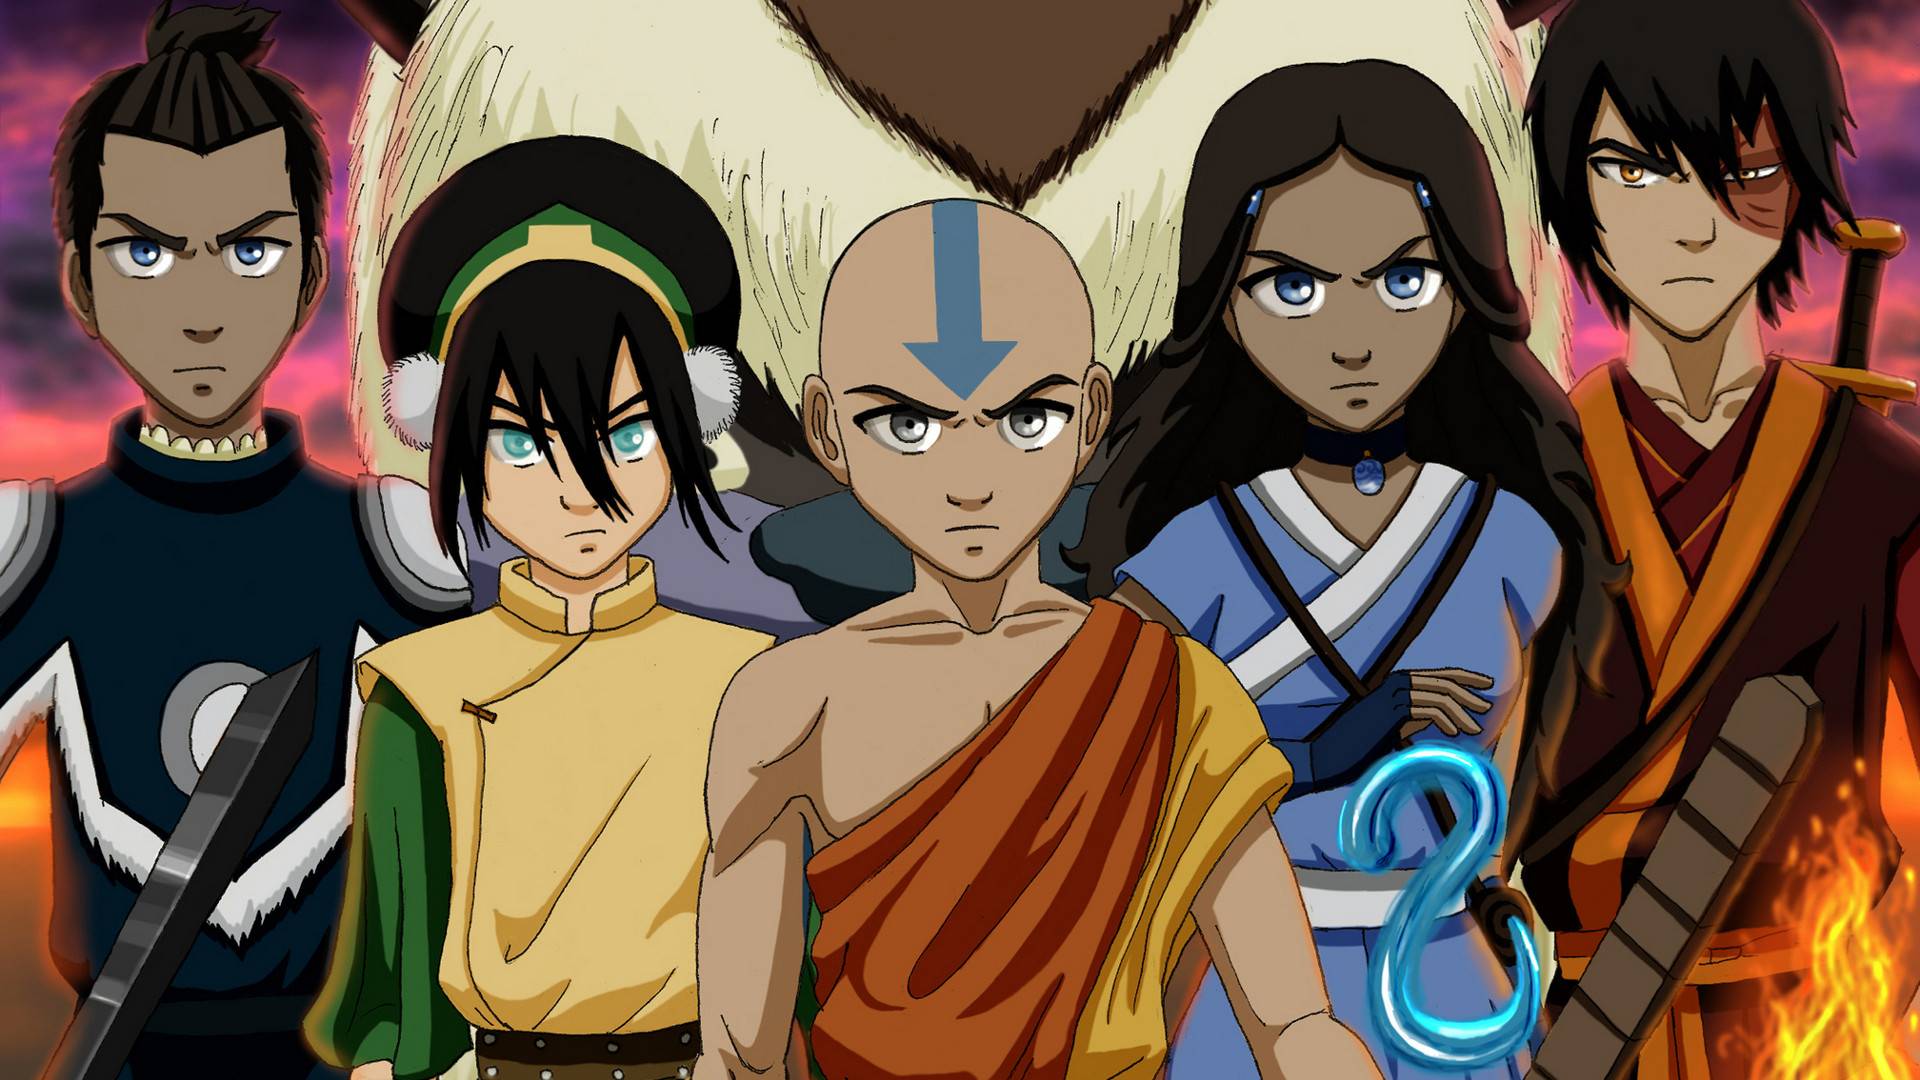 Gallery for - avatar the last airbender wallpaper aang